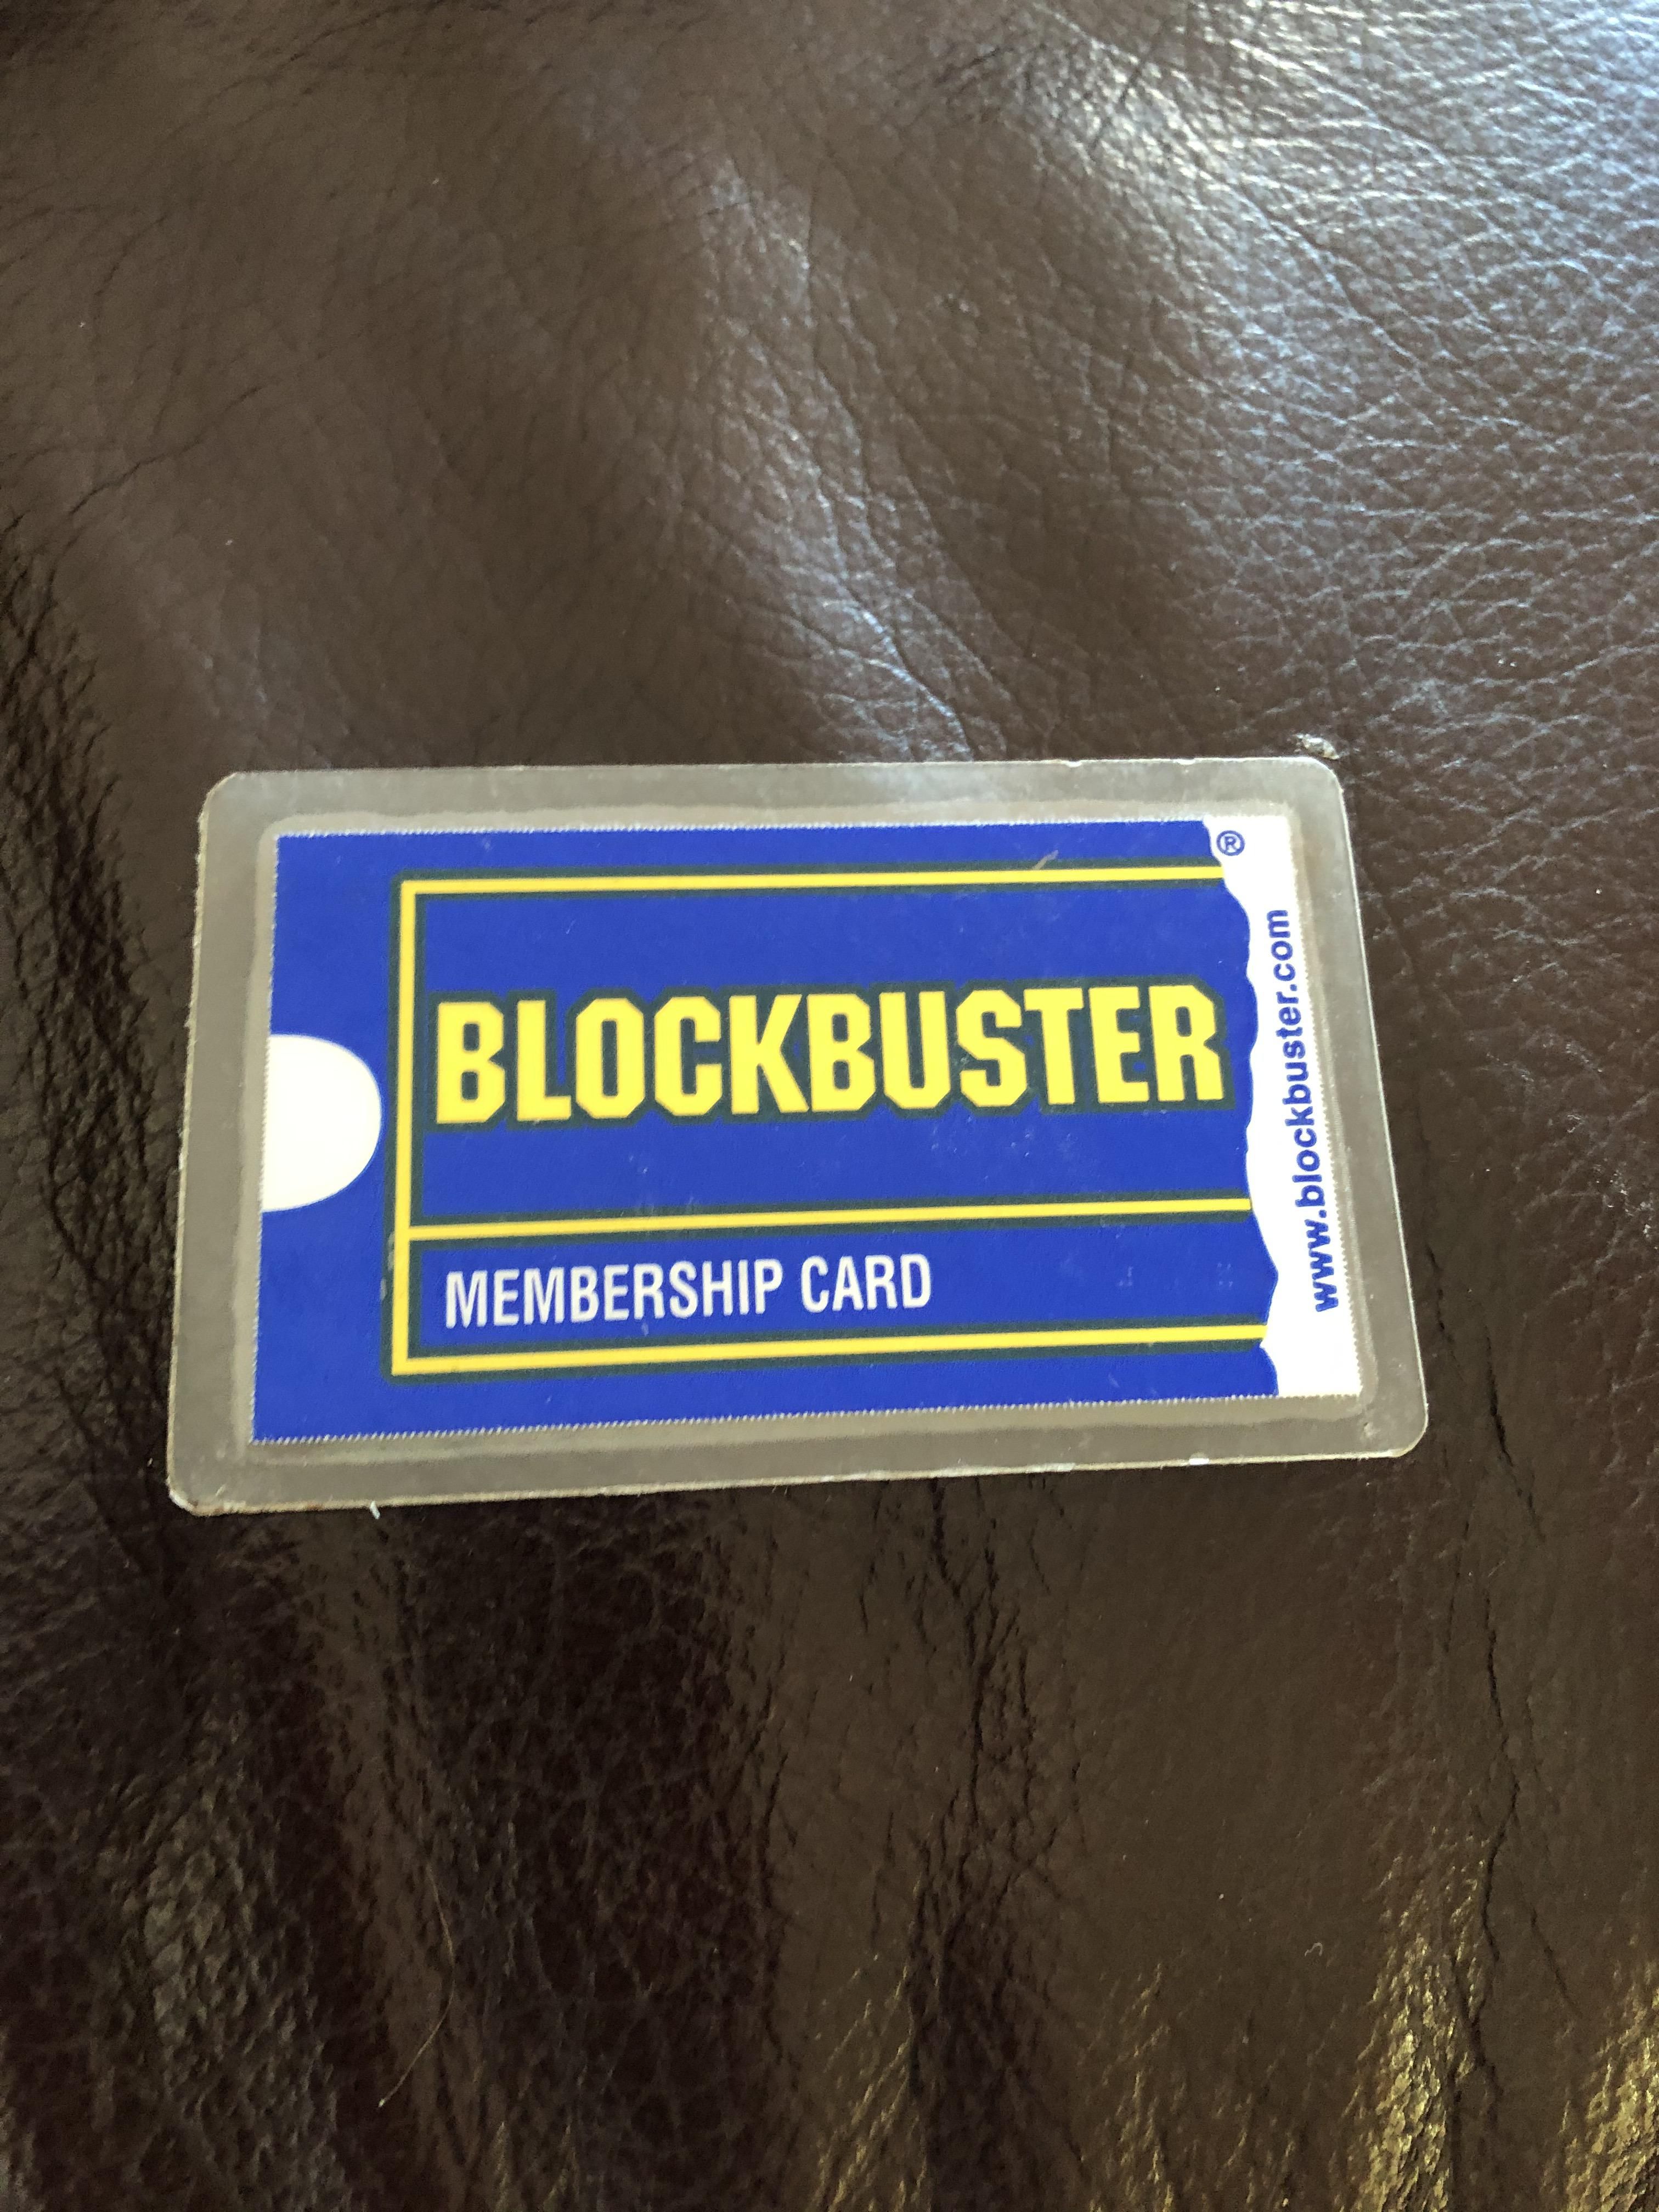 Found a fossil while cleaning out my desk.